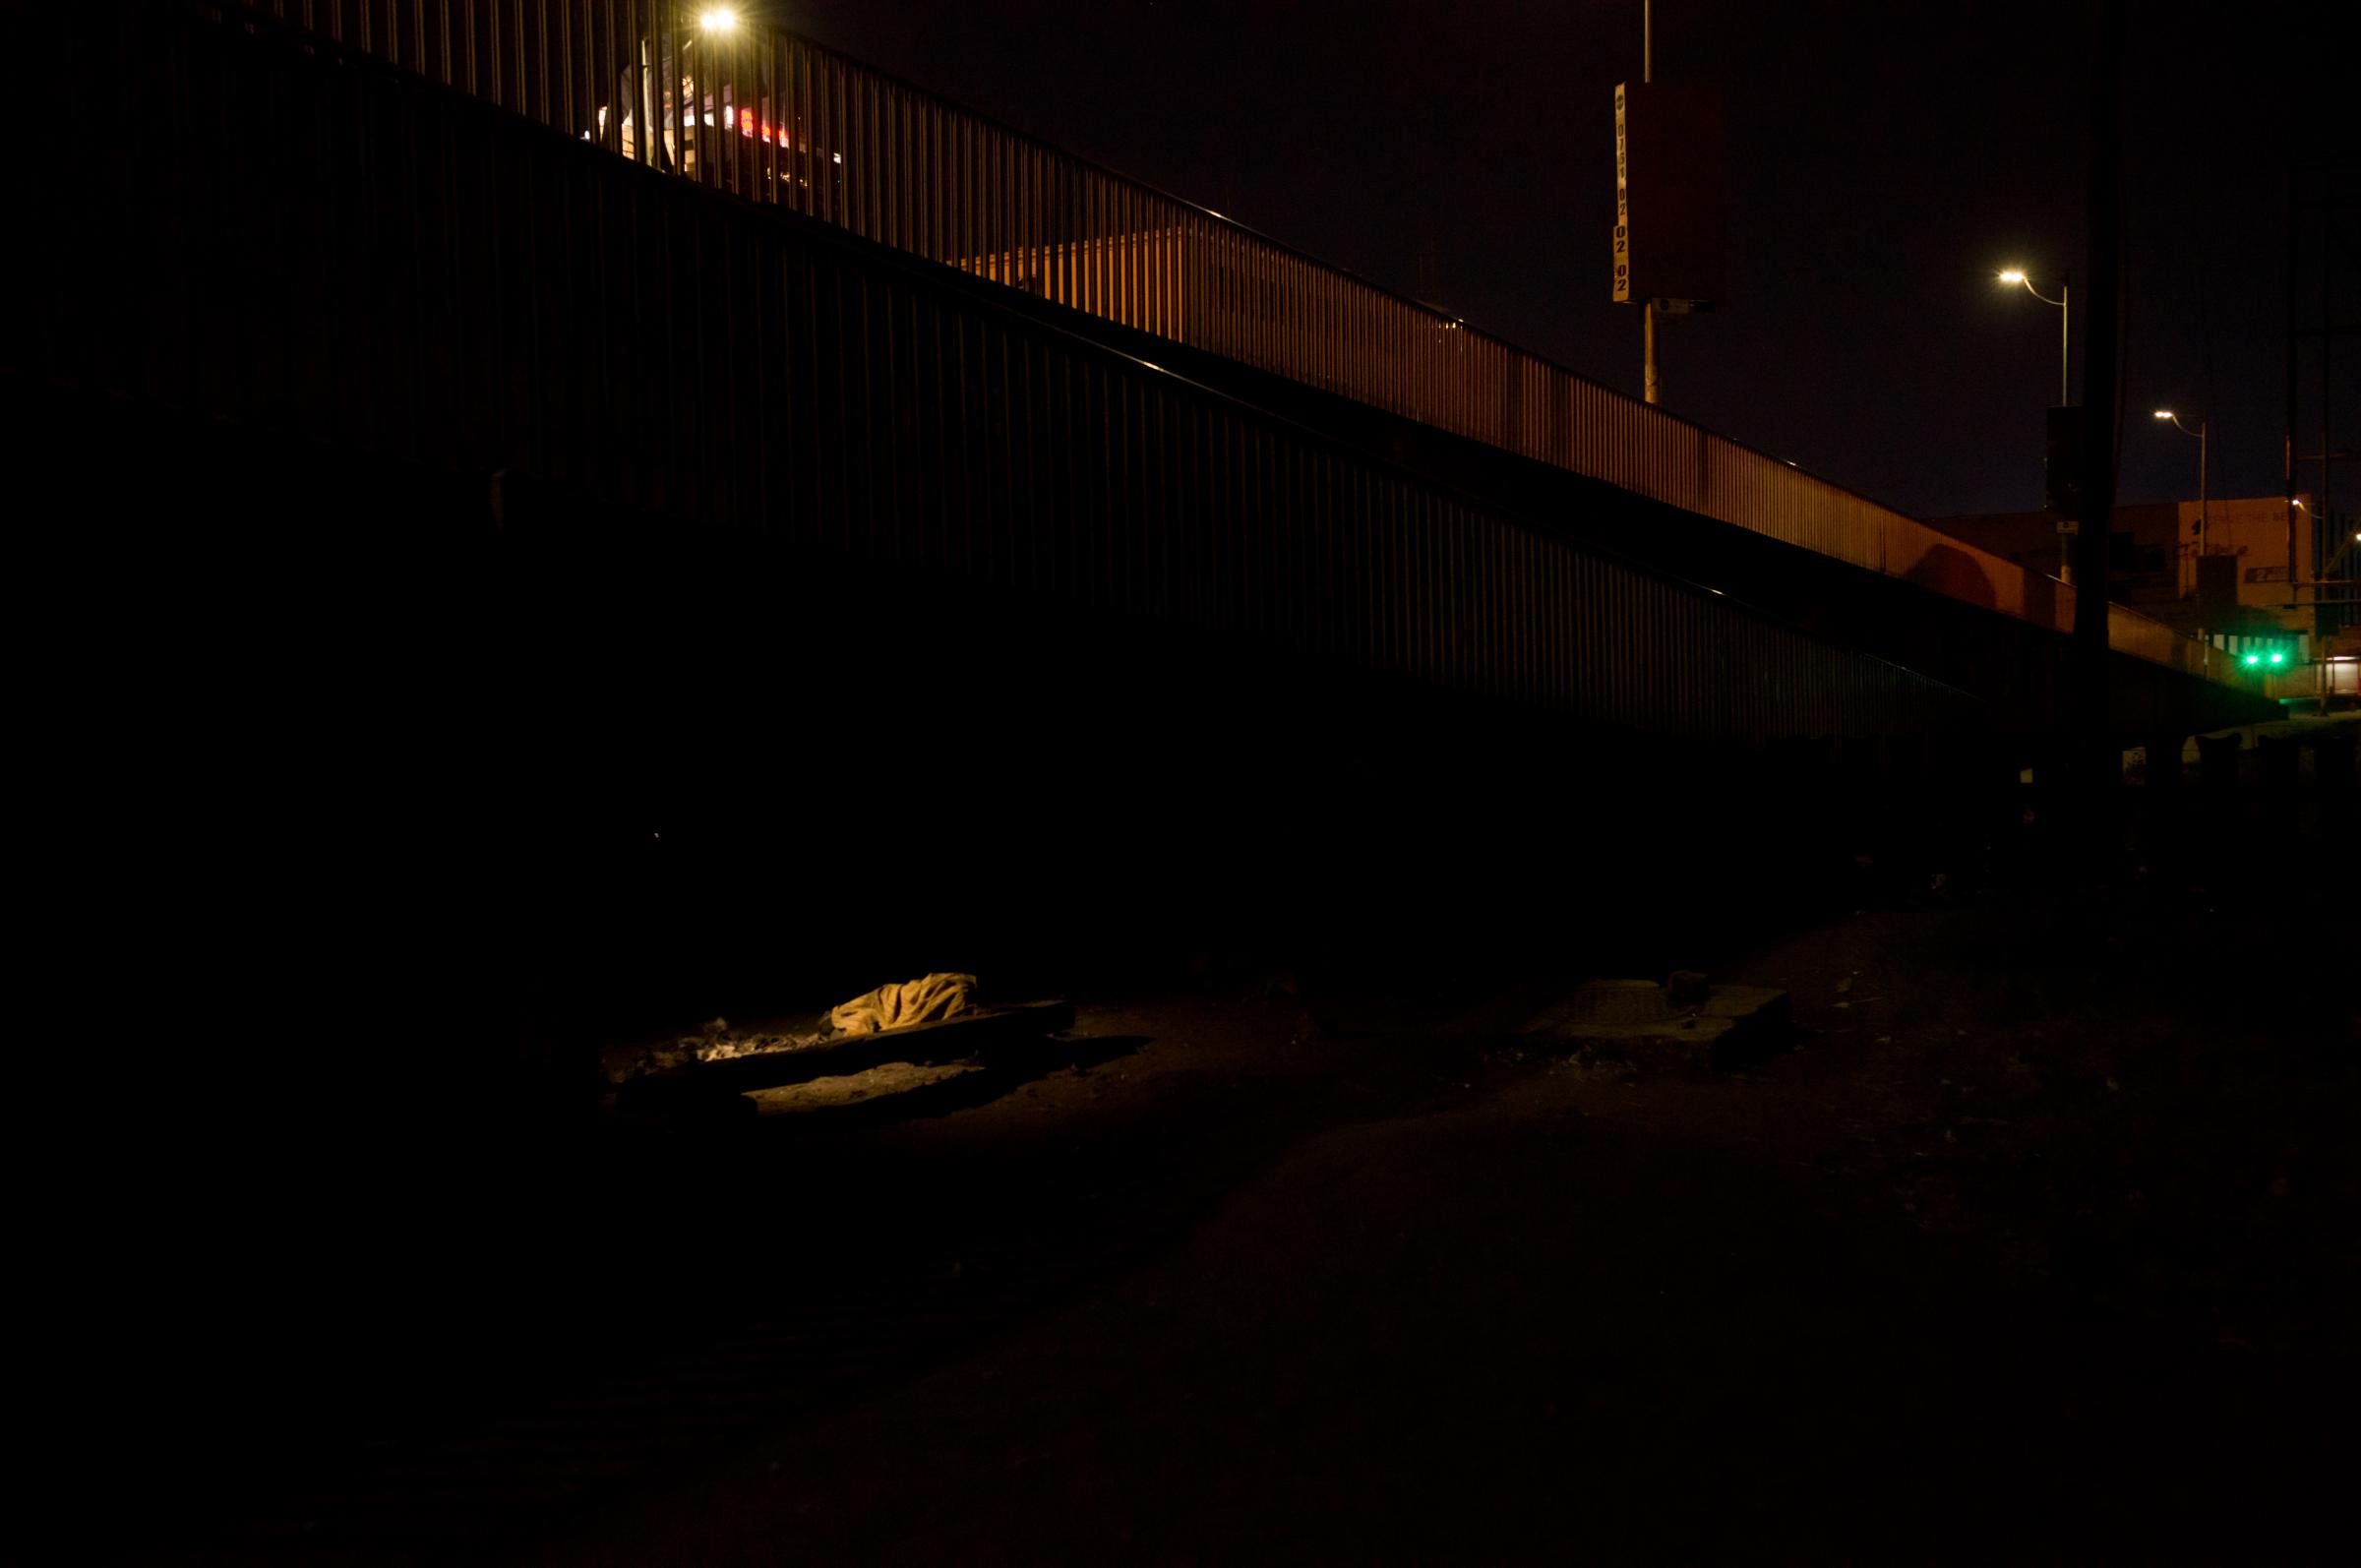 Life on the street in Lusaka - A body under a blanket is lit by a single street lamp; asleep under the bridge.